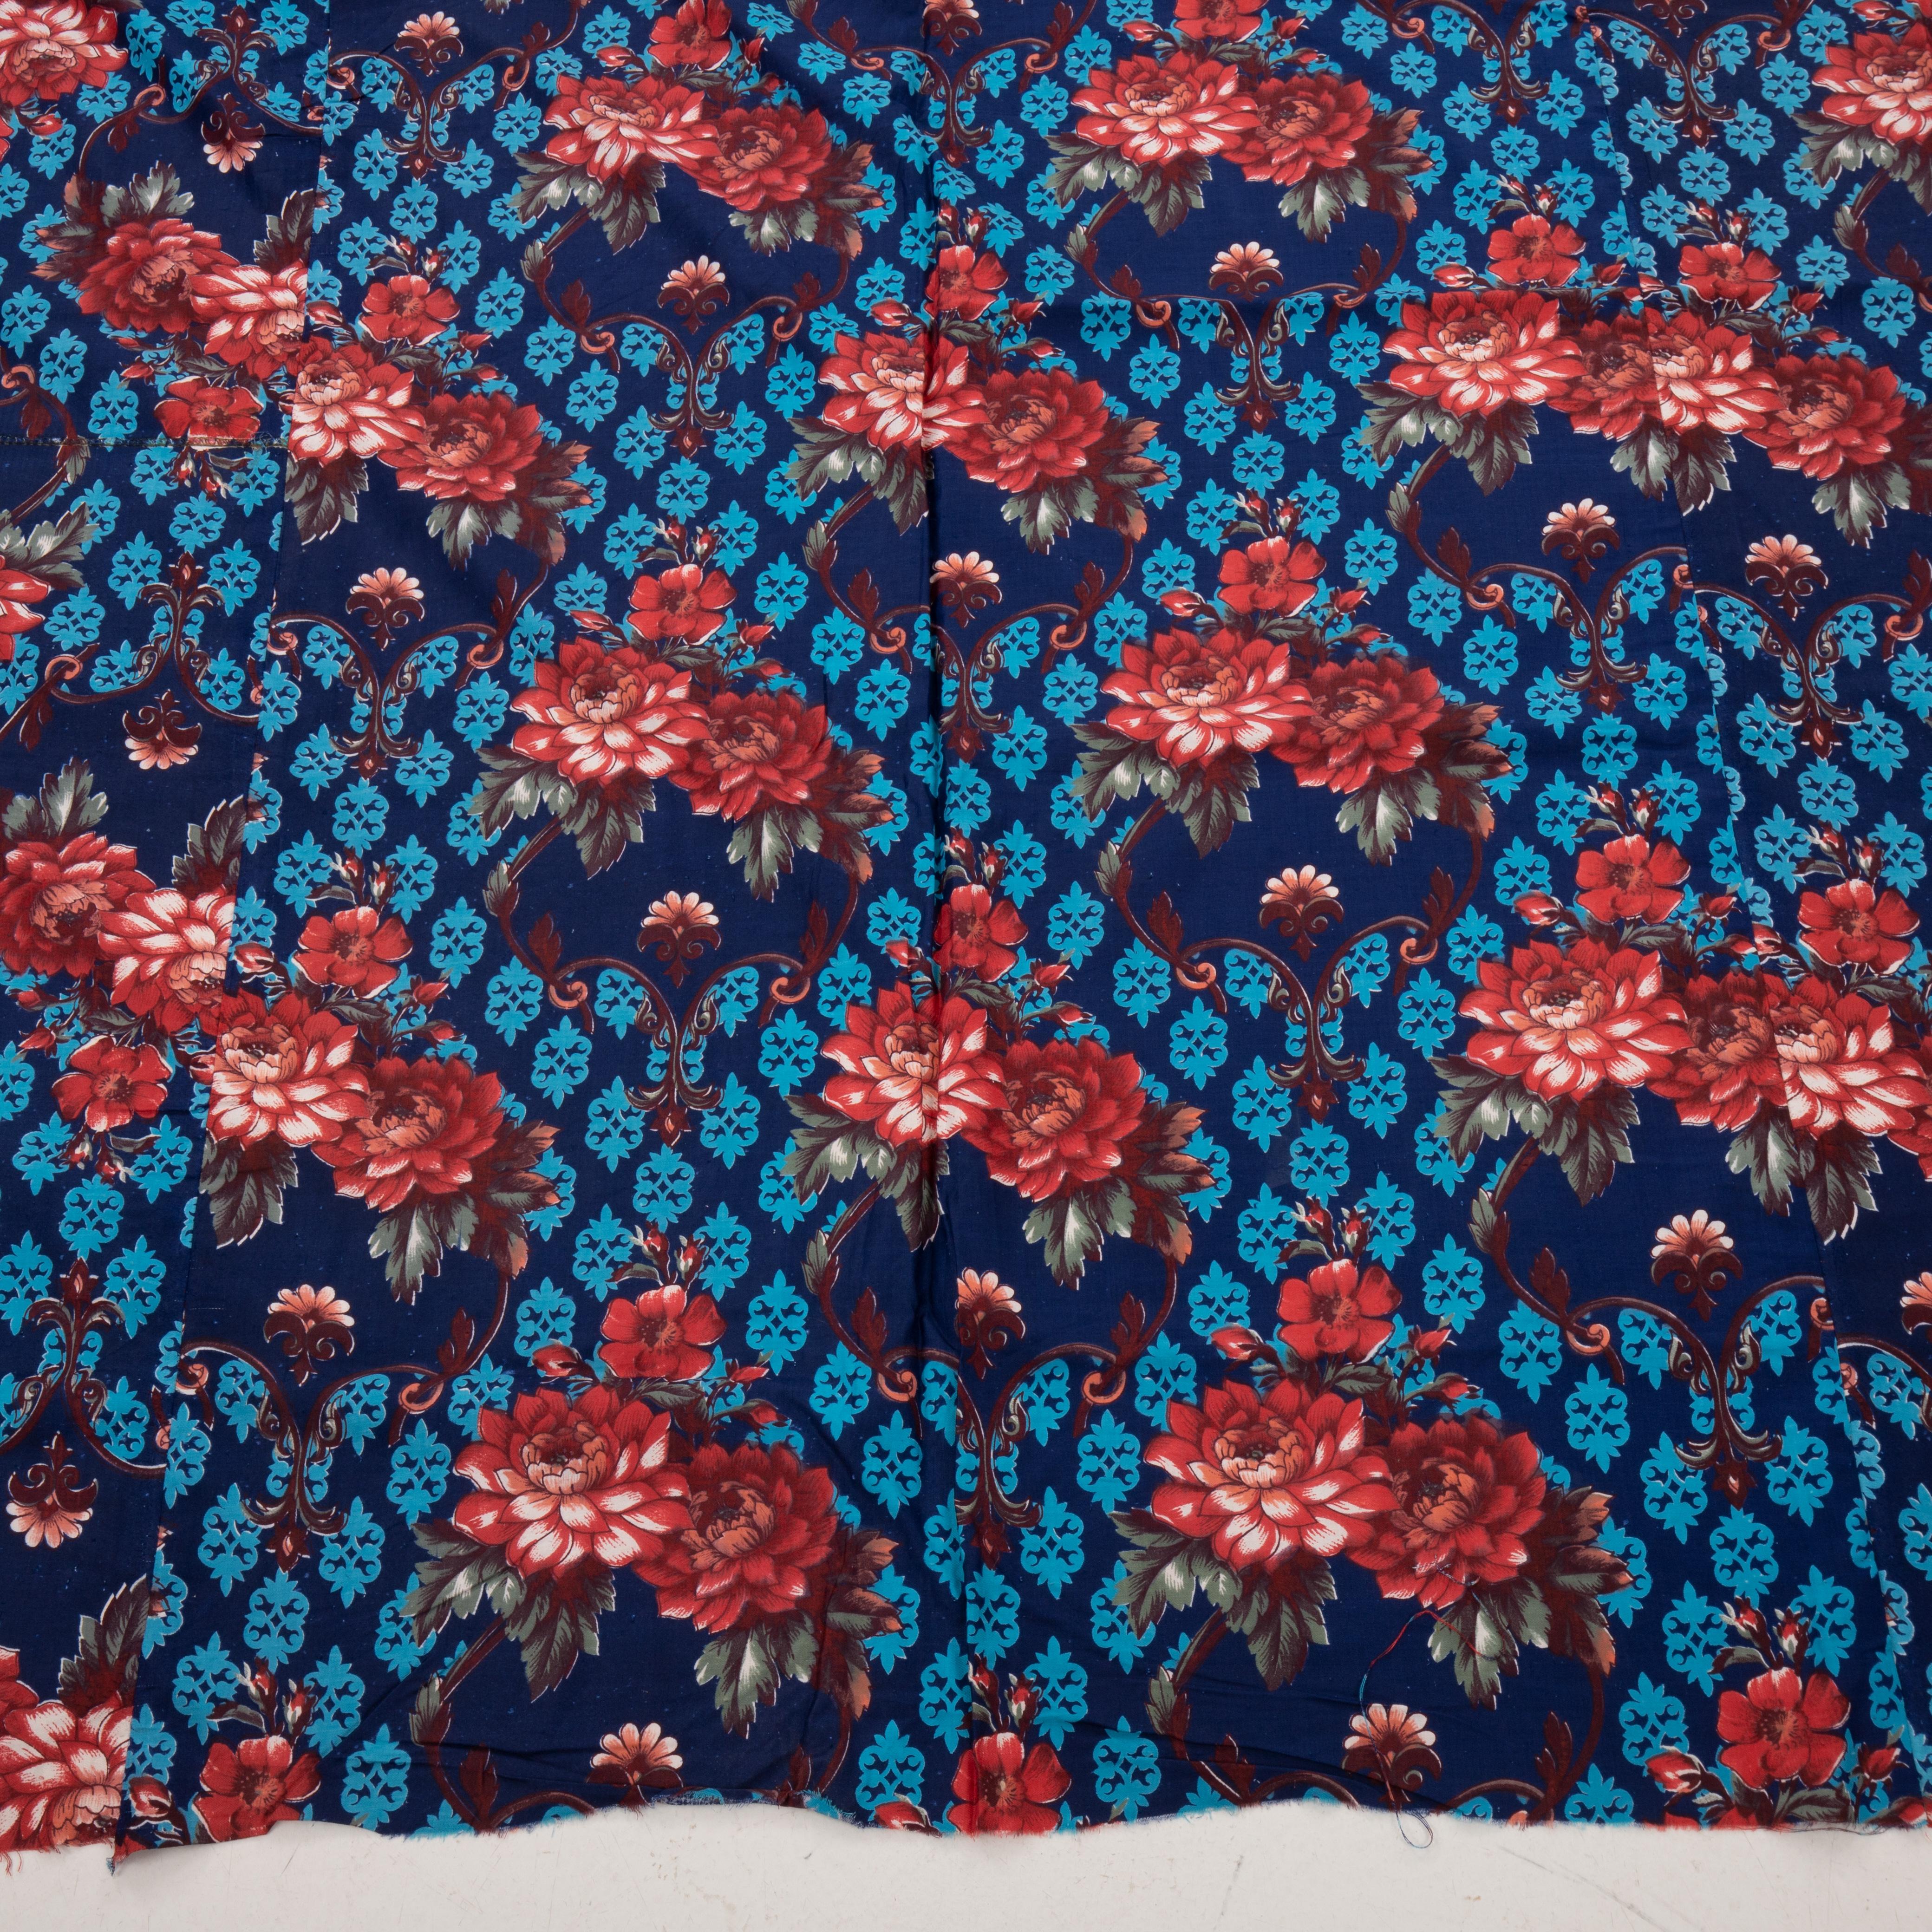 Kalamkari Roller Printed Cotton Panel, Made for Central Asian Markets  Mid 20th C.  Russia For Sale